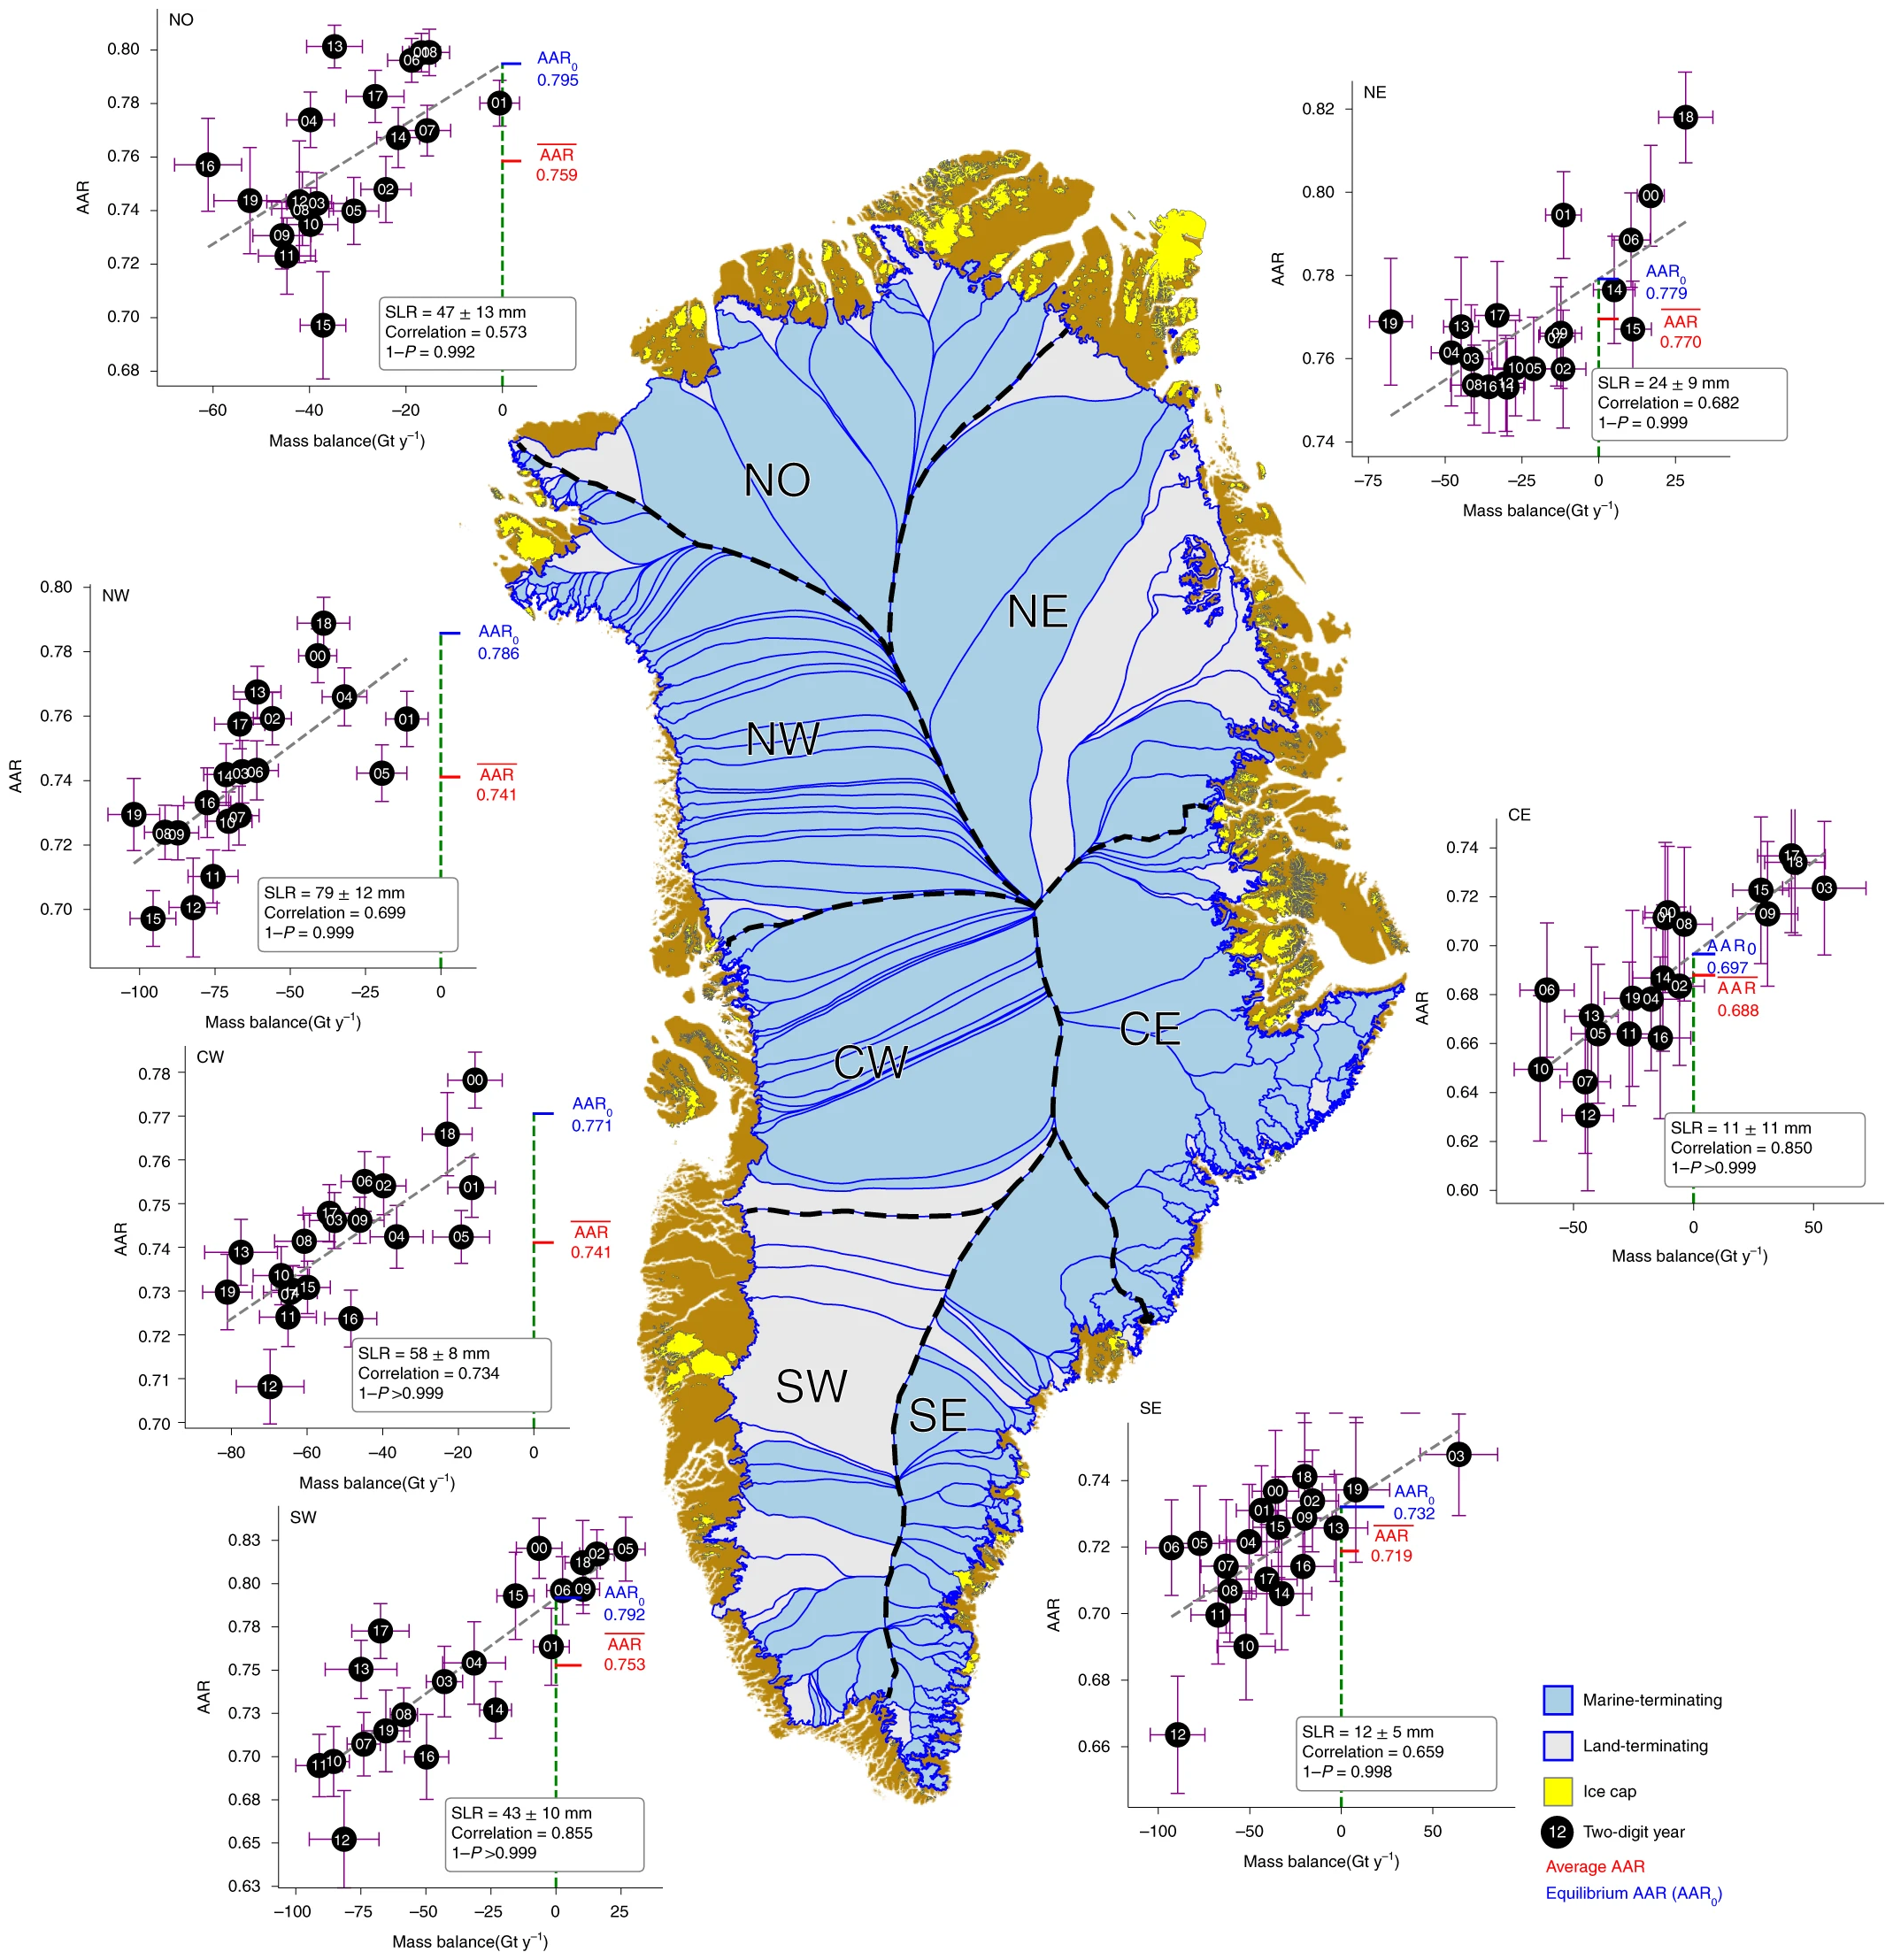 Greenland ice sheet flow sectors, individual catchments and peripheral ice caps with regional correspondence between annual values of mass balance and accumulation area ratio (AAR). The whiskers and ± quantities indicate ensemble single s.d. The ice sector outlines are after Morlighem, et al., 2017. Graphic: Box, et al., 2022 / Nature Climate Change